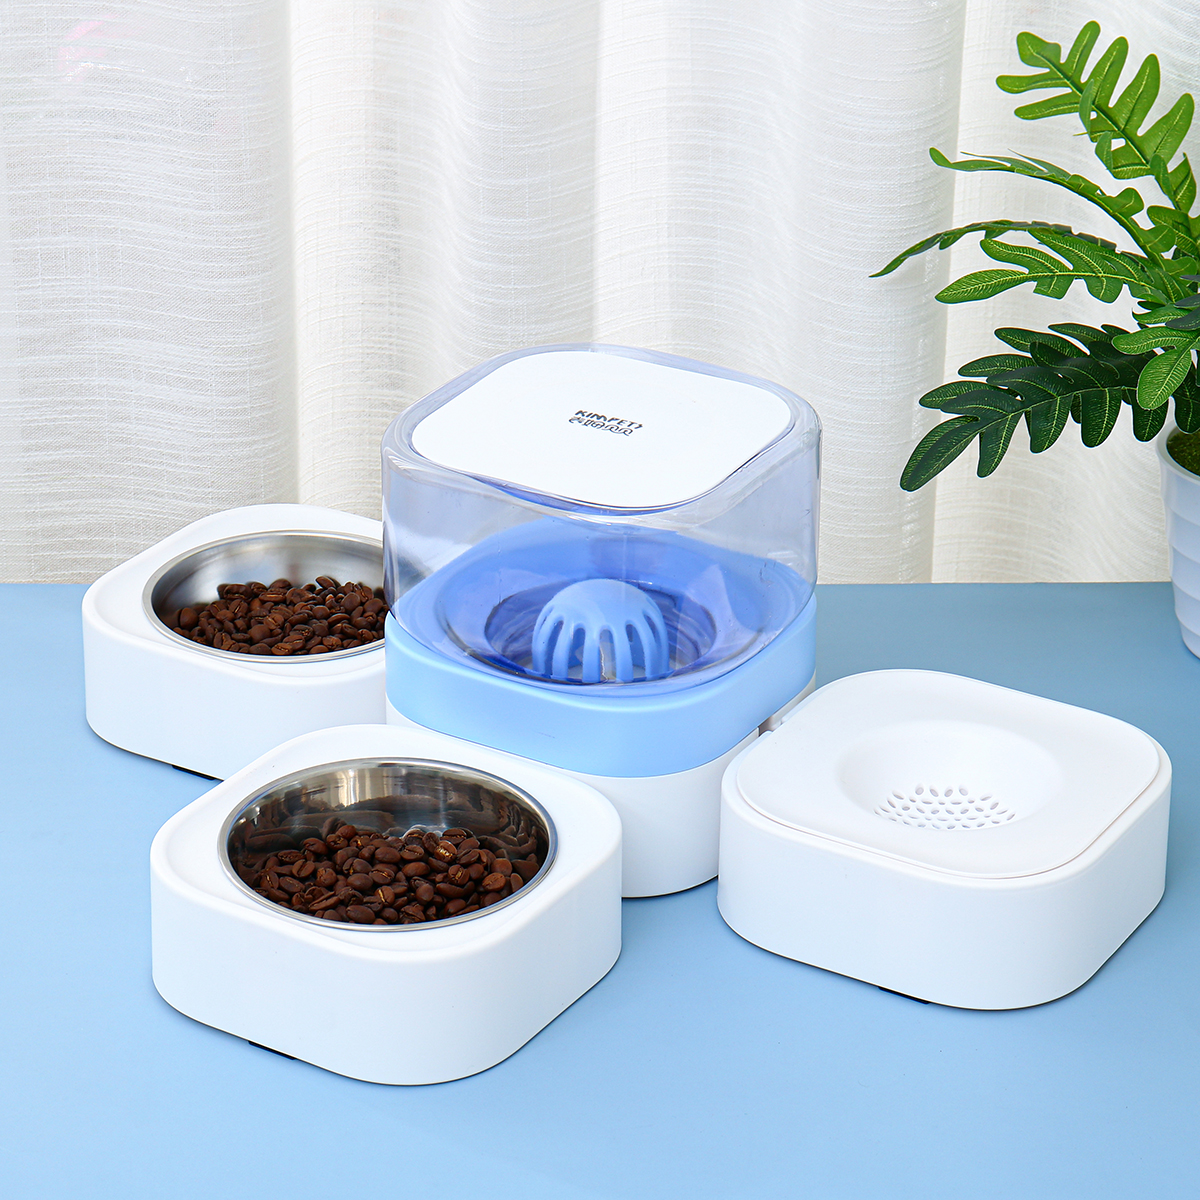 18L-Pet-Bowls-Food-Automatic-Feeder-Fountain-Water-Drinking-for-Cat-Dog-Pet-Feeding-Container-Pet-Su-1775165-5